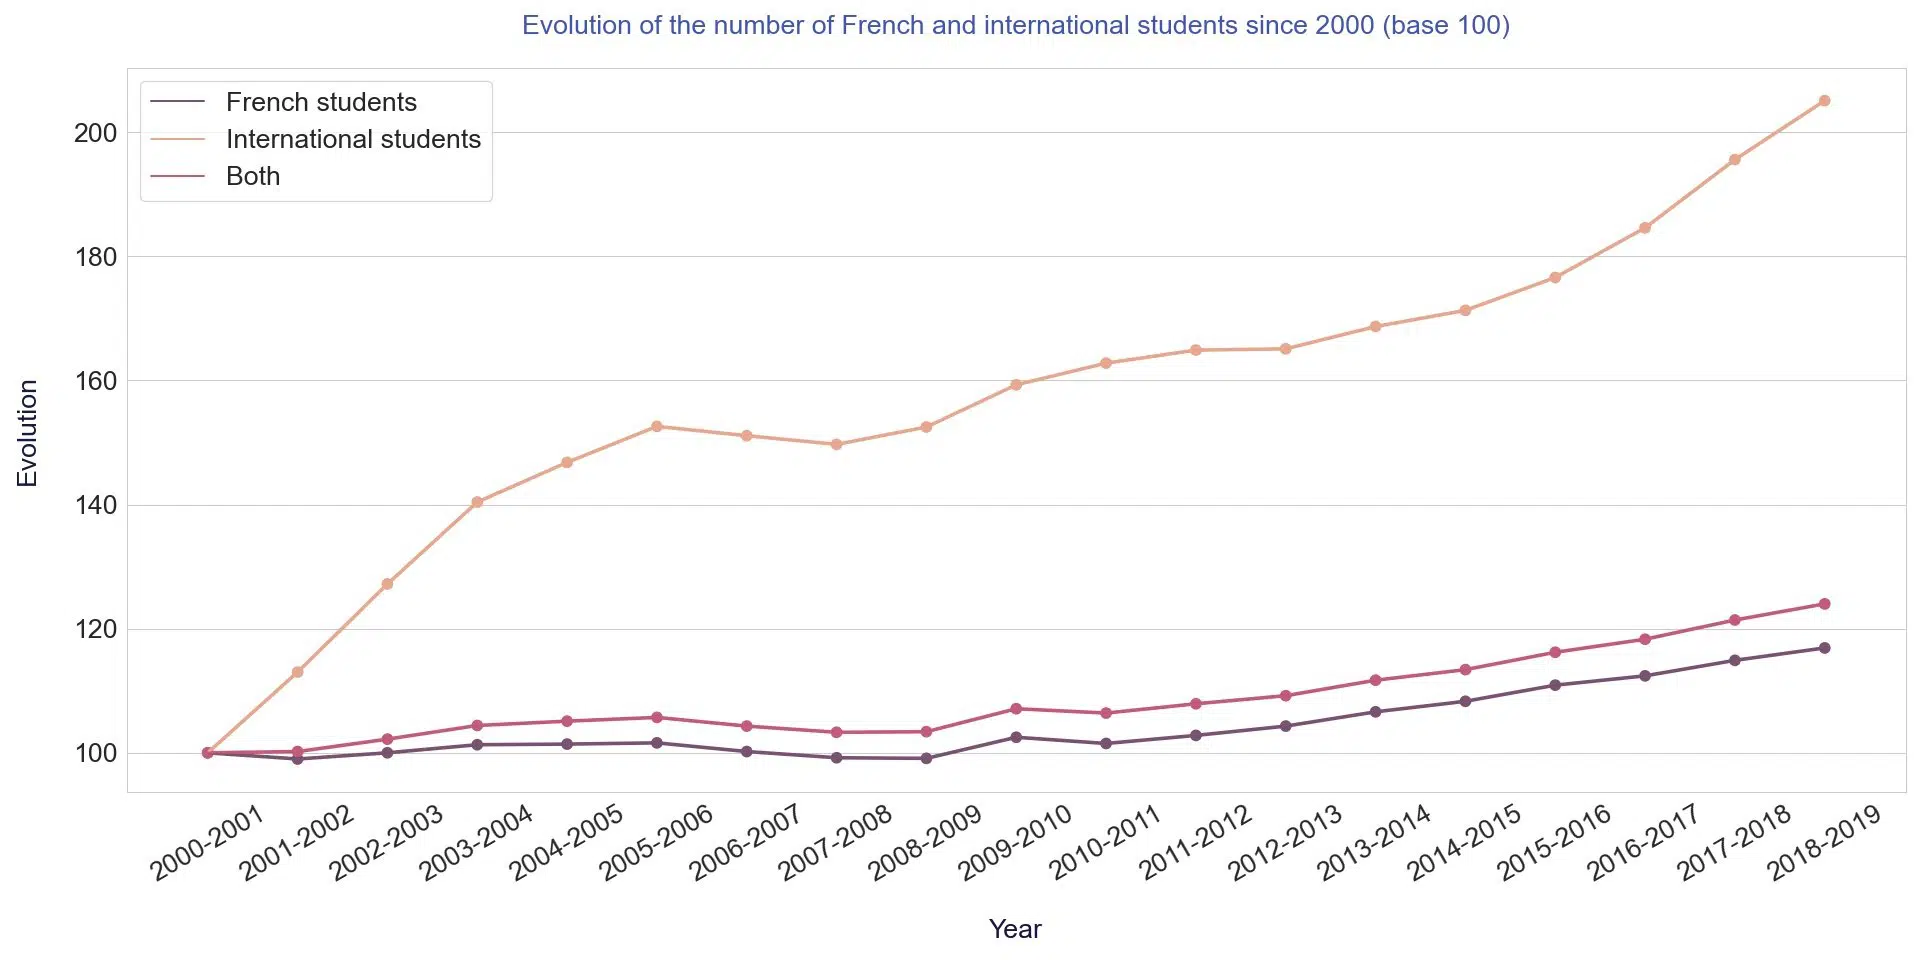 graph lines evolution trend french international students from 2000 to 2019